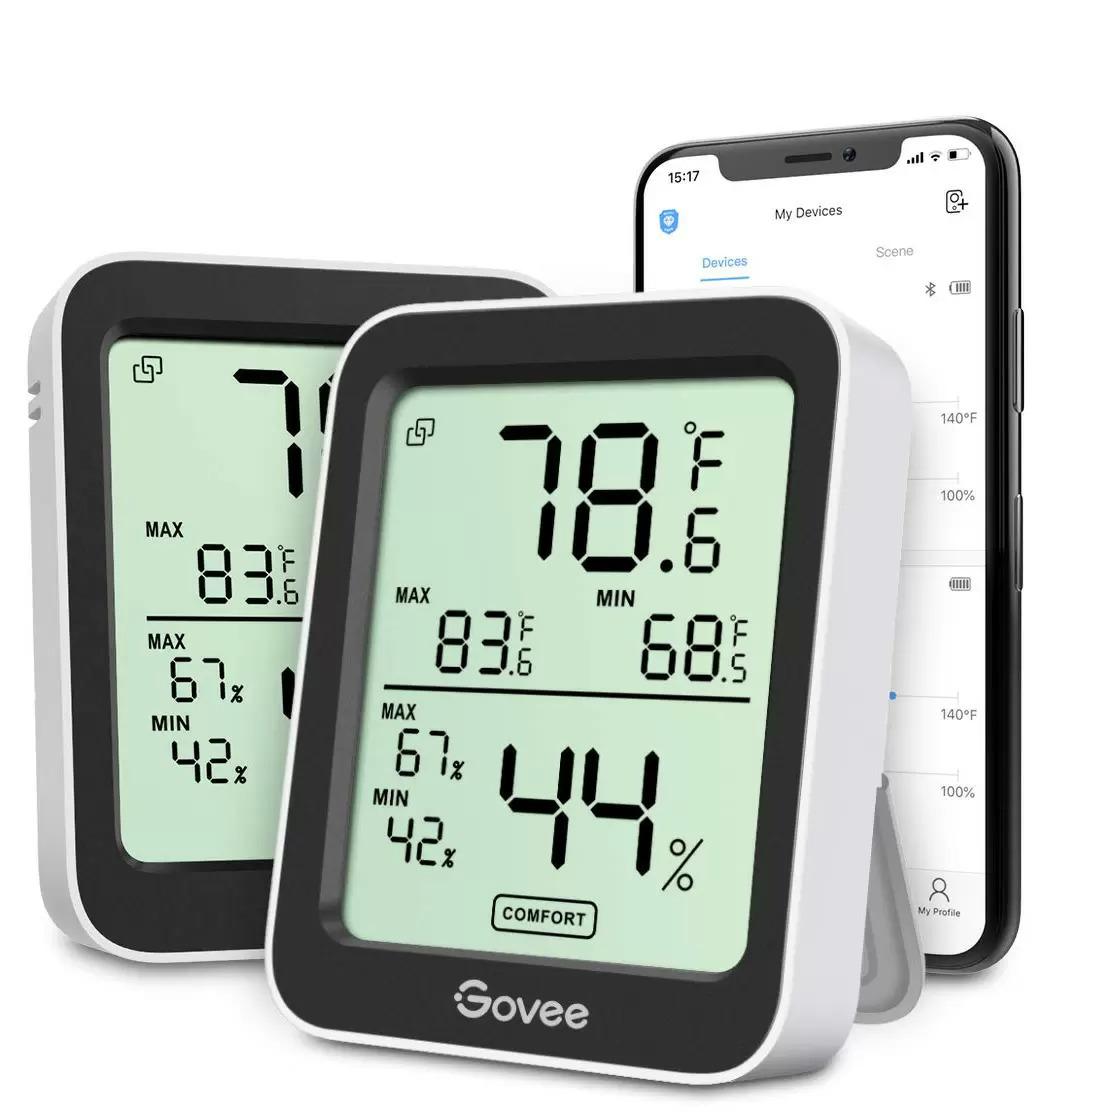 Govee Indoor Bluetooth Temperature Humidity Monitor H5075 for $15.49